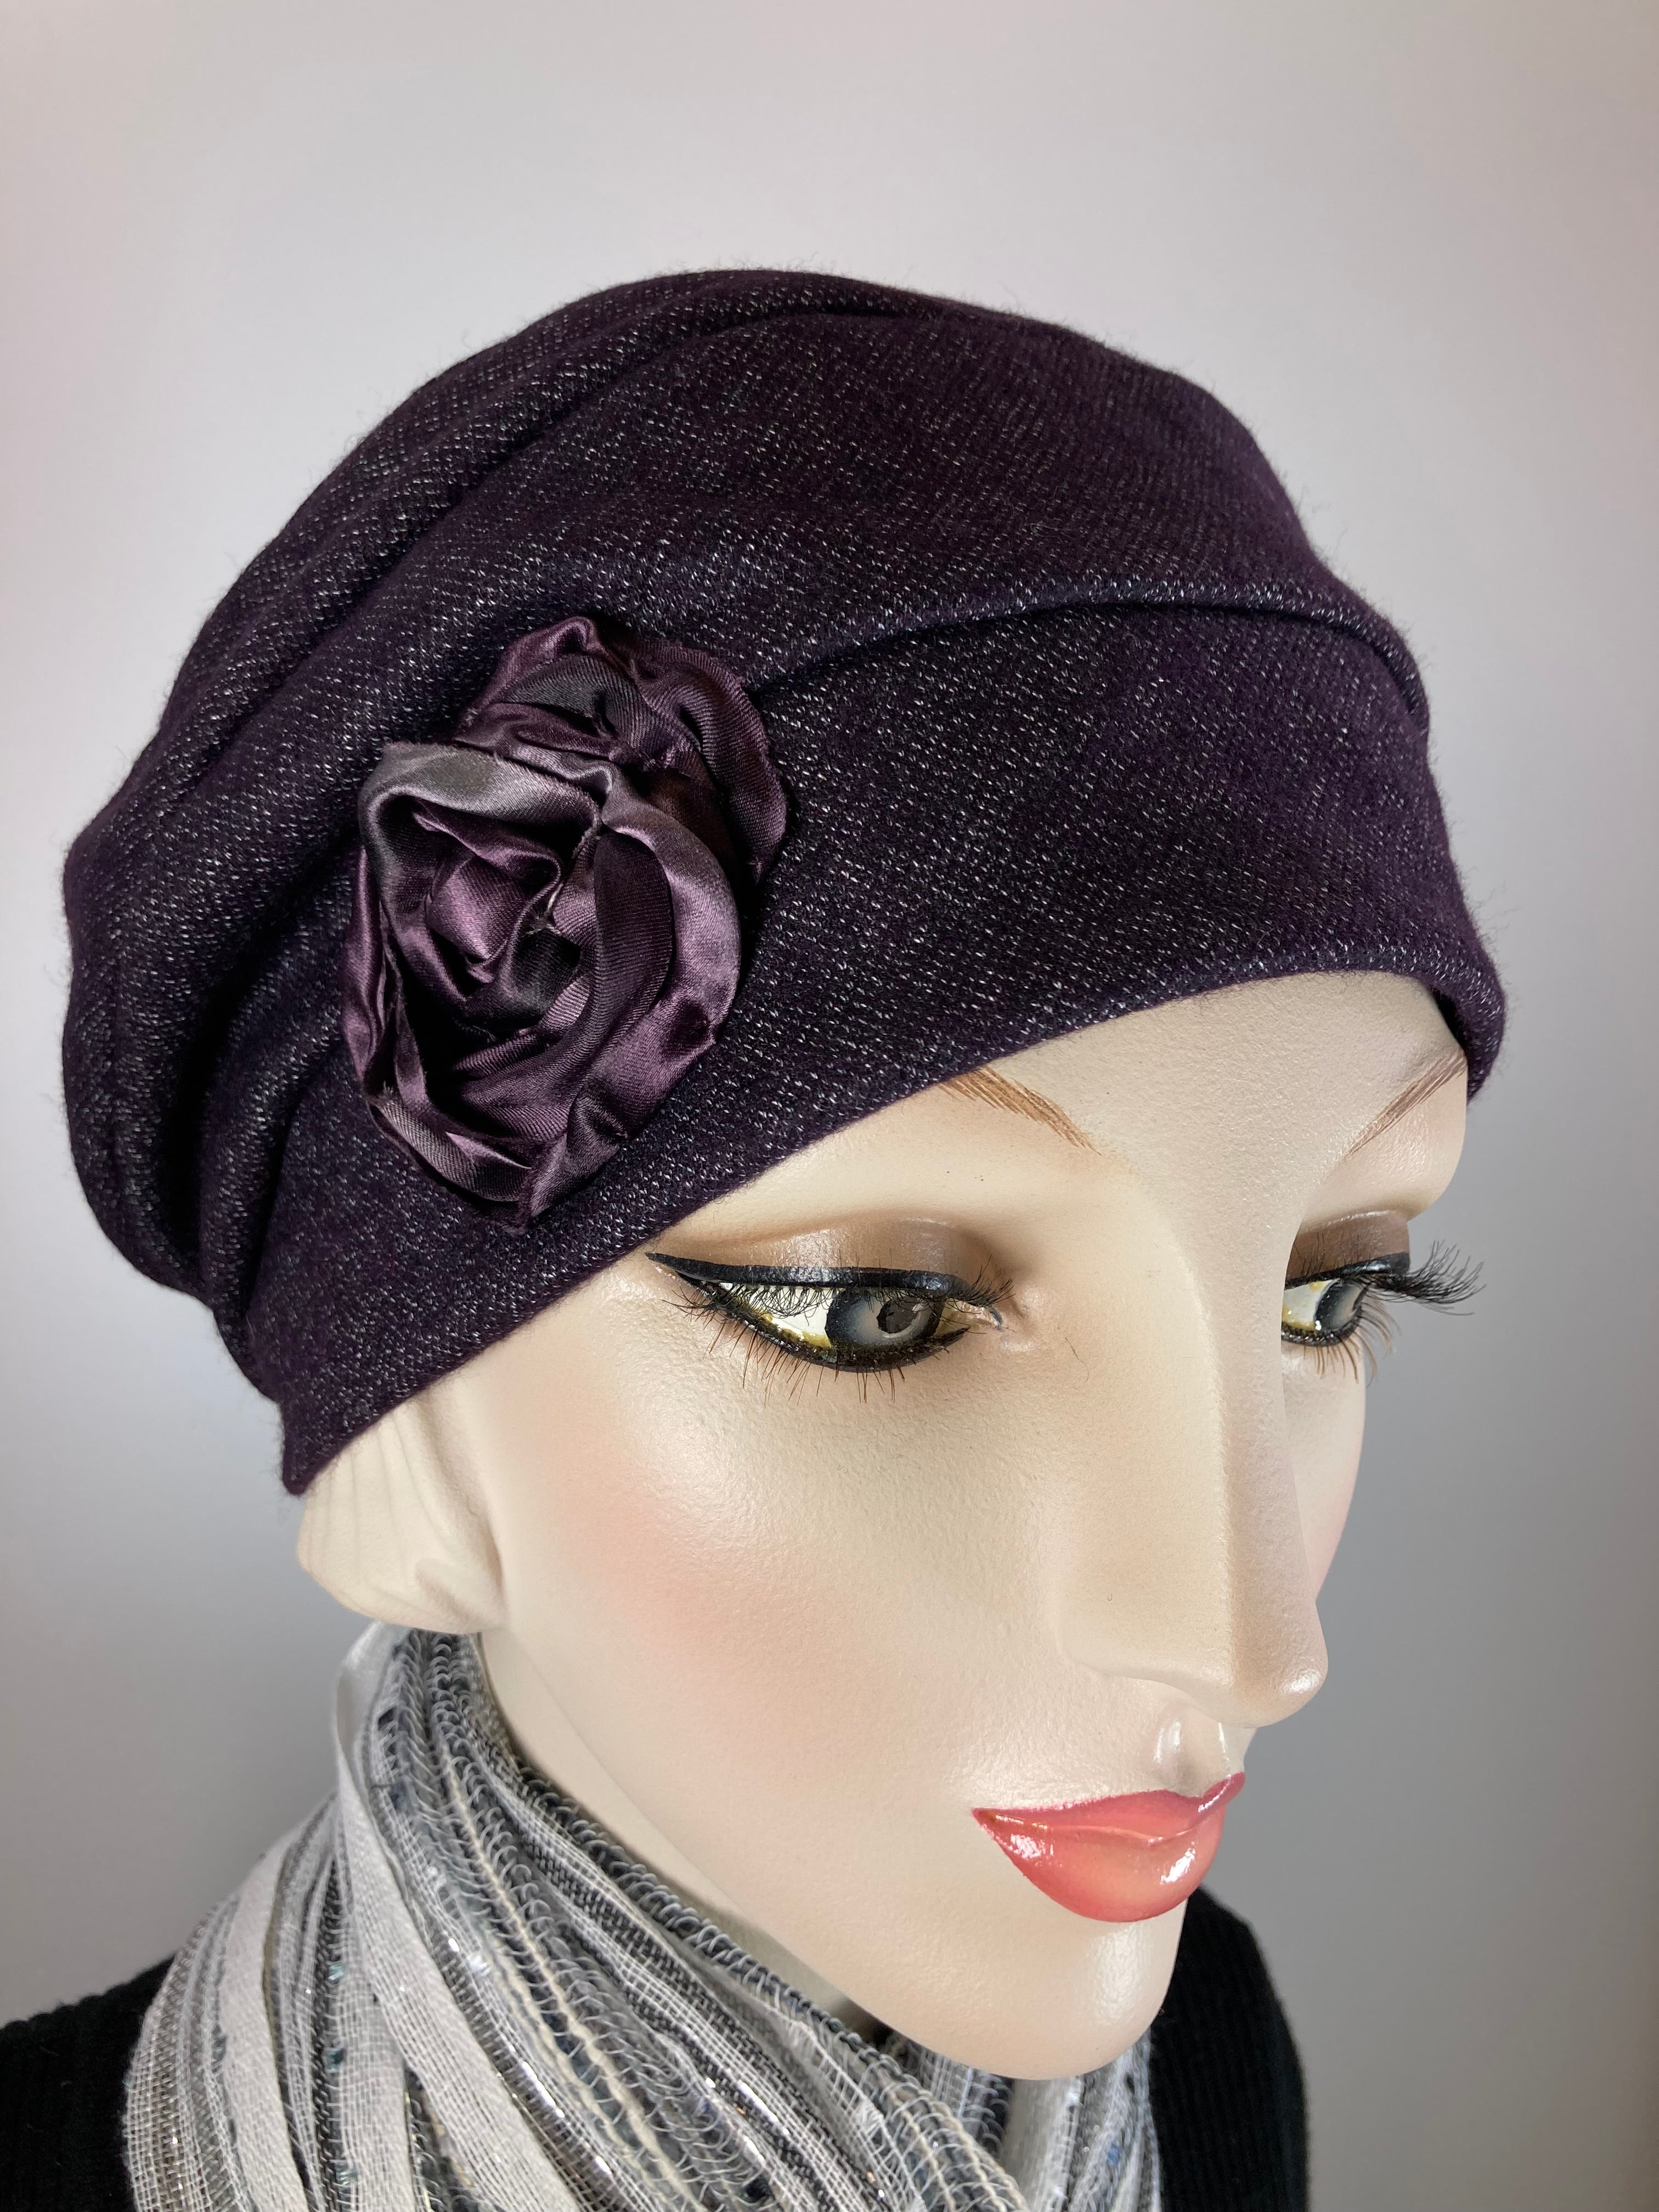 Womens Slouchy Beret. Knit dark purple Hat. Slouch Chemo Alopecia Hat. Boho chic casual hat. Ladies travel hat. Stylish fabric hat.